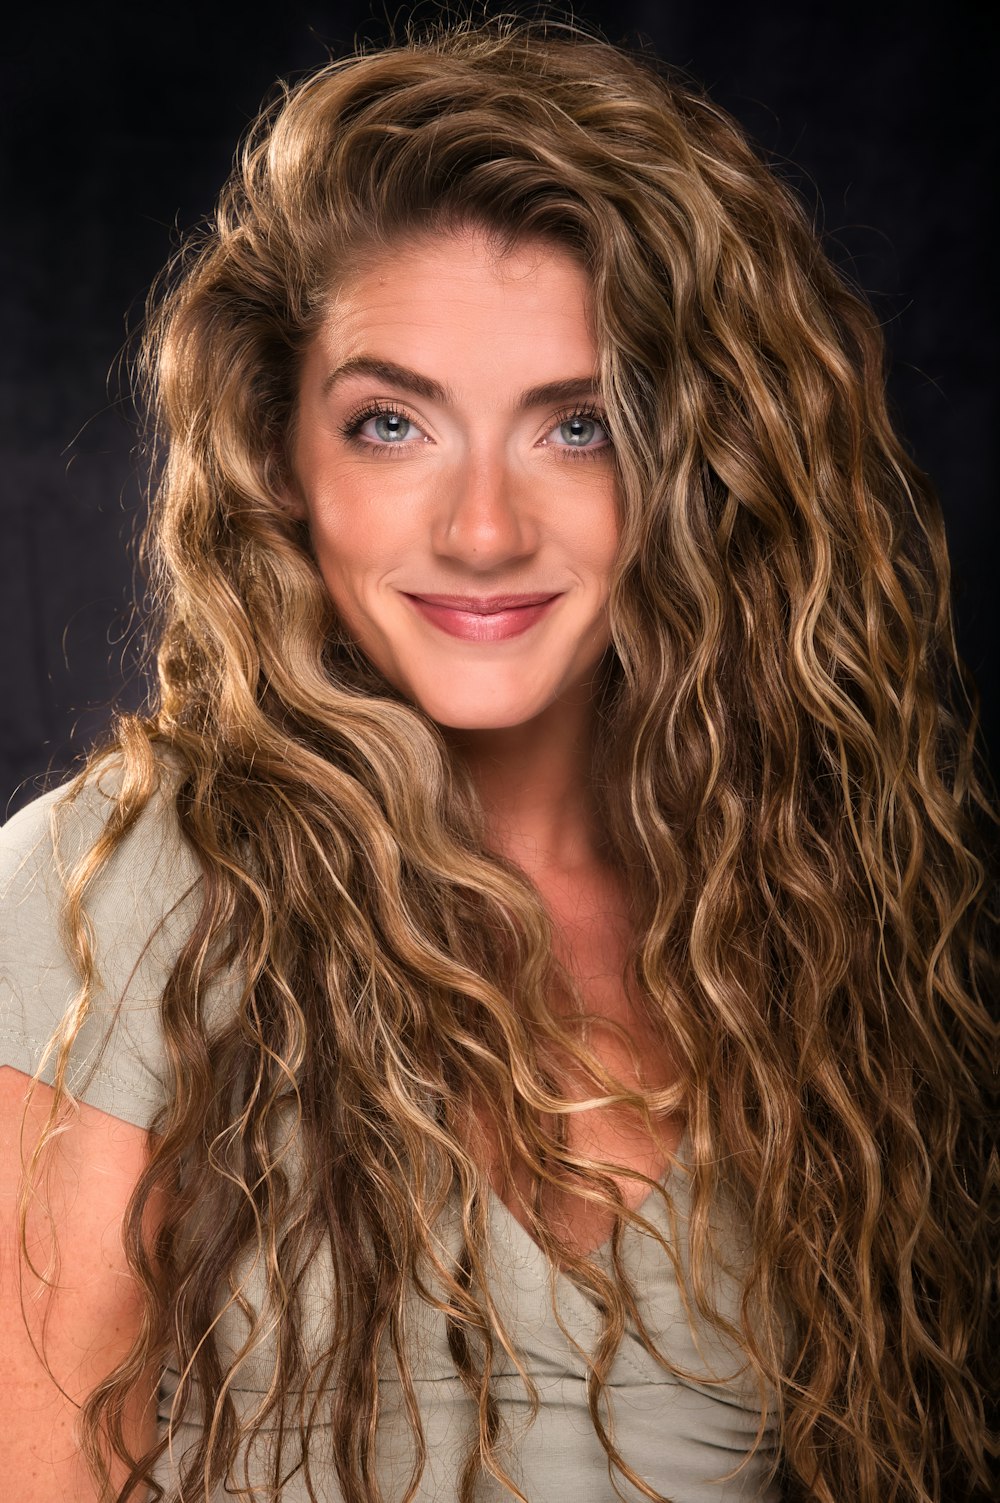 a woman with long curly hair and a smile on her face